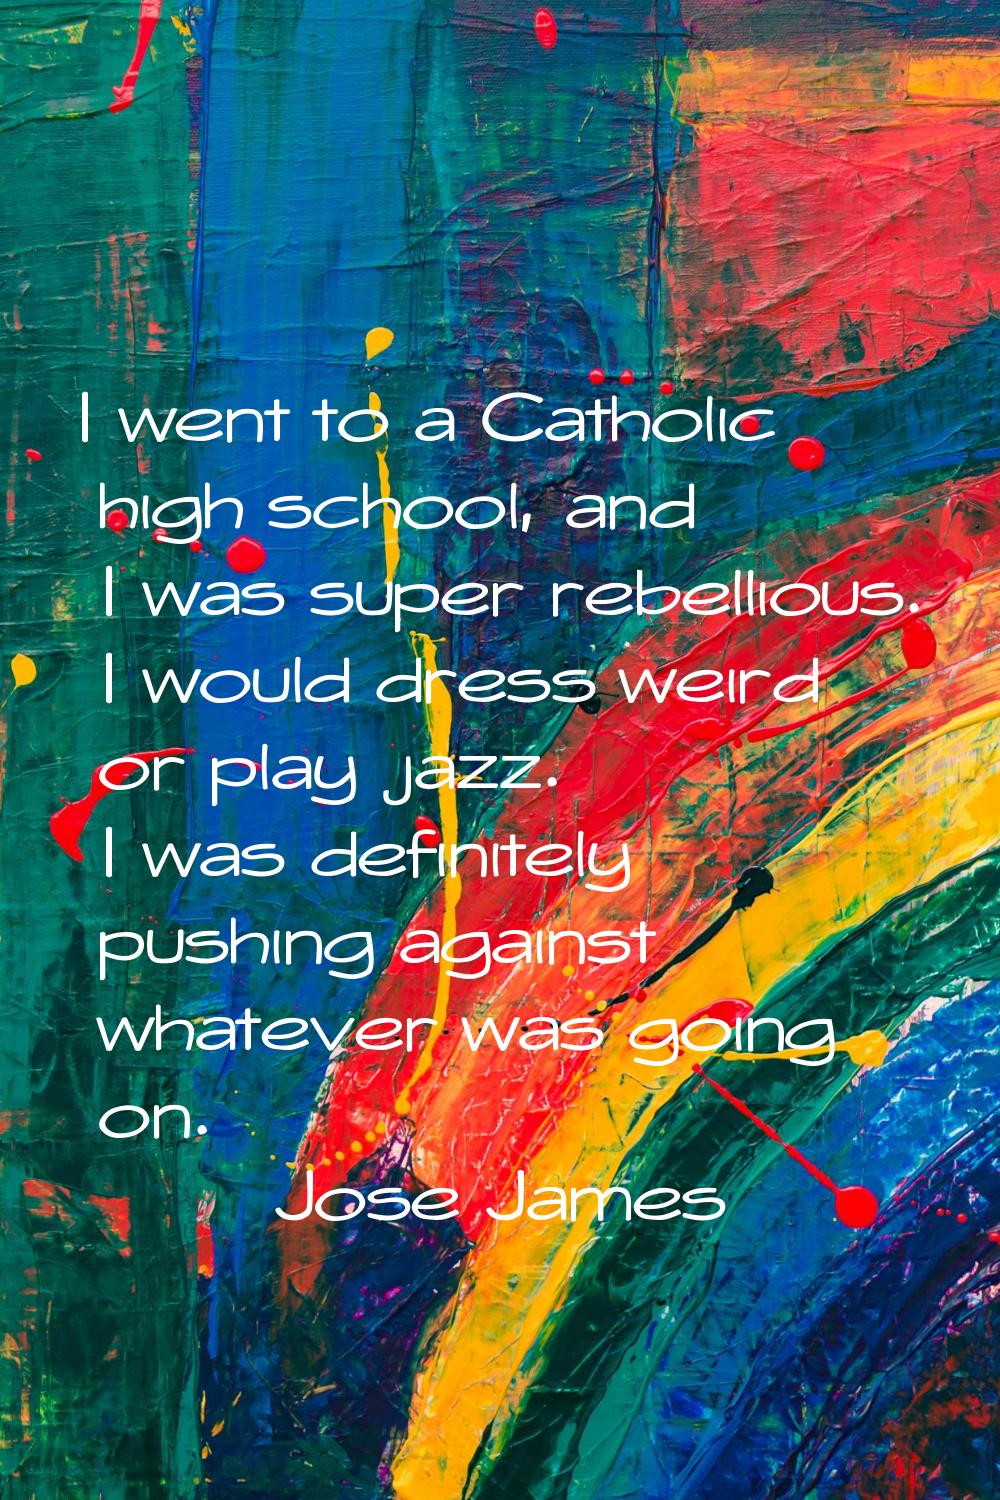 I went to a Catholic high school, and I was super rebellious. I would dress weird or play jazz. I w